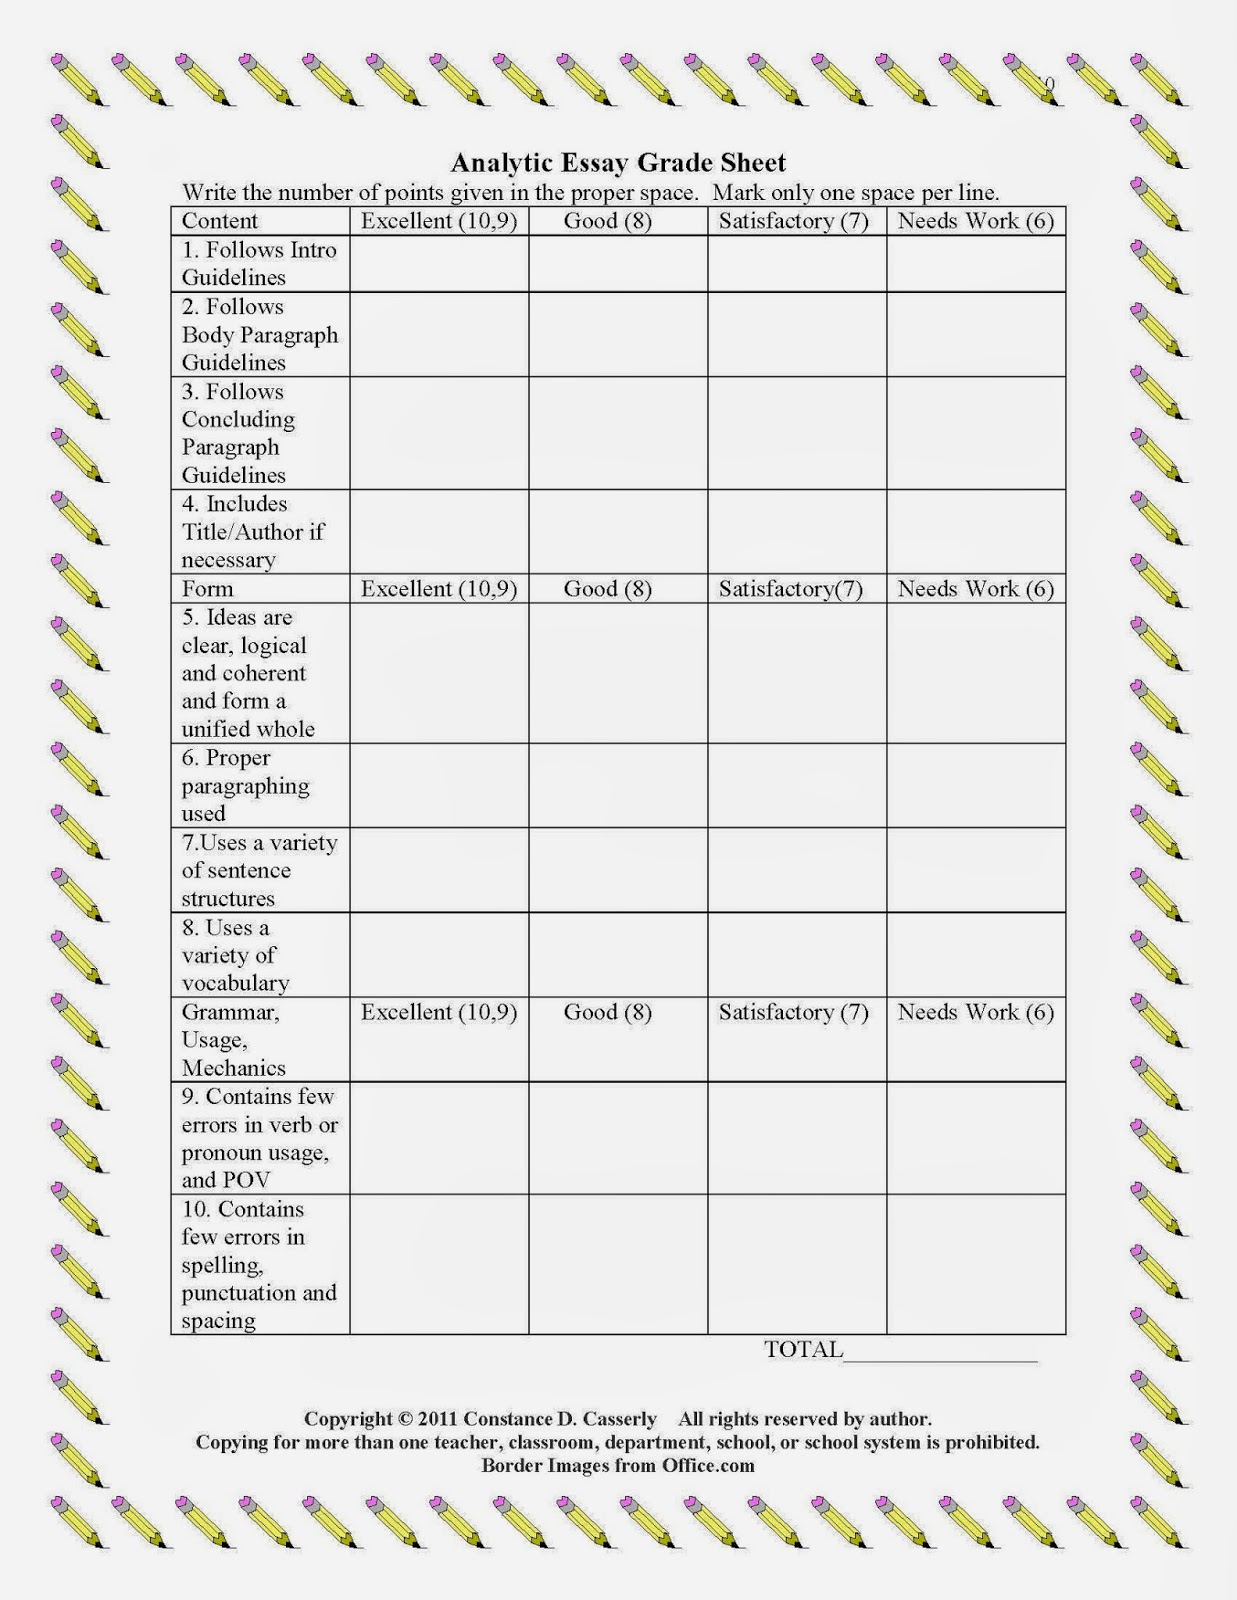 Write Right! Analytic Writing Made Easy Grading Rubric